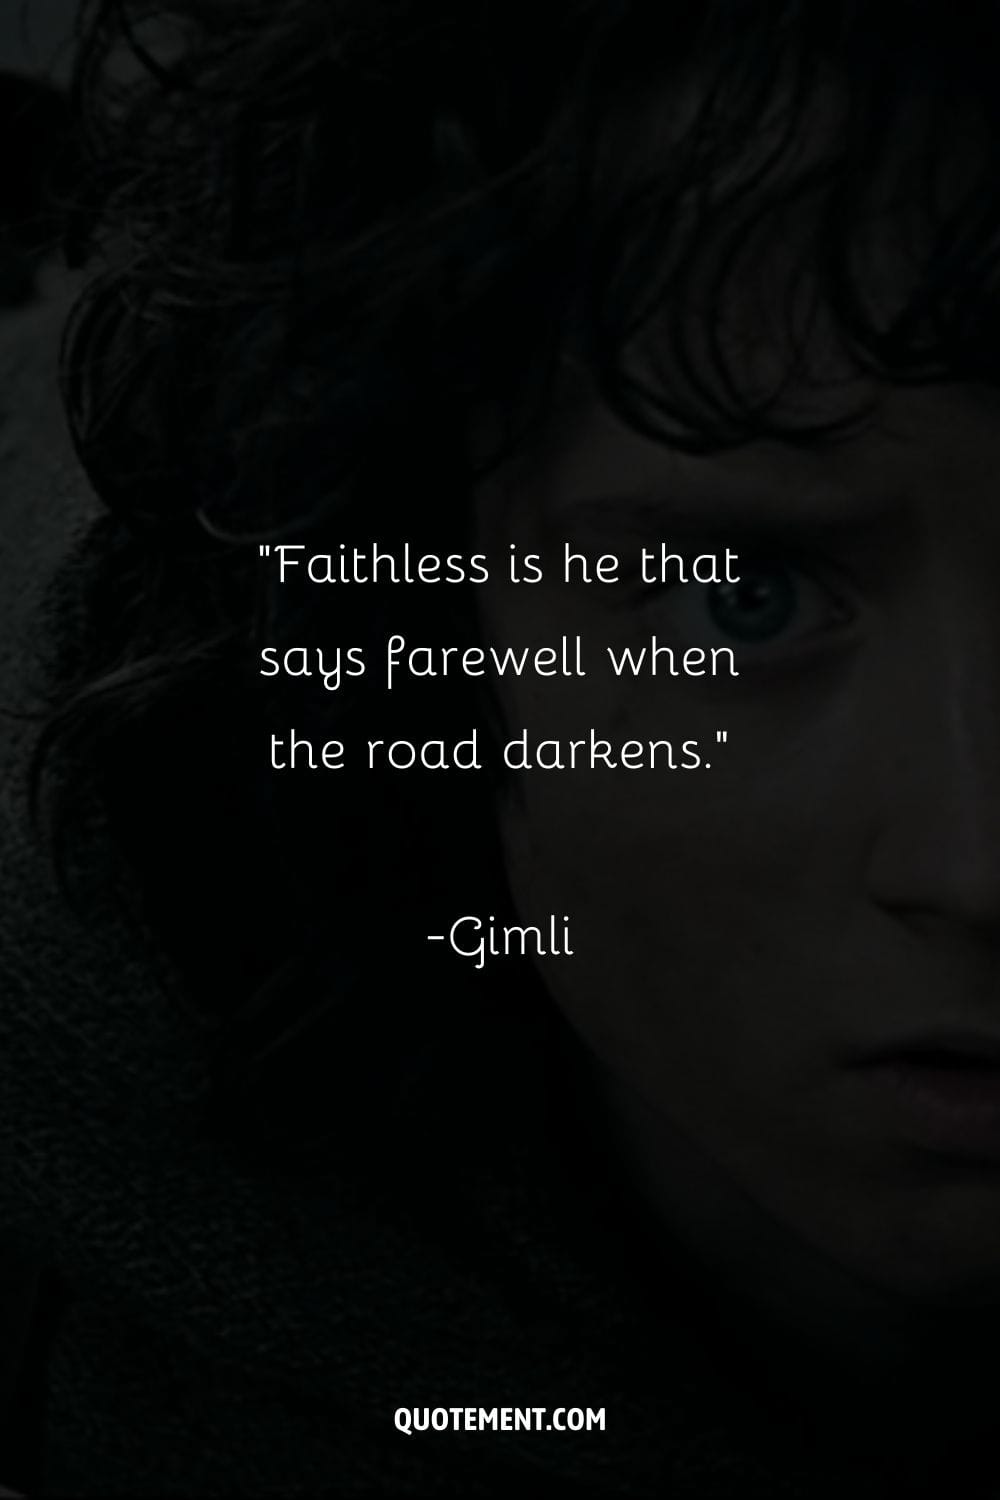 Faithless is he that says farewell when the road darkens